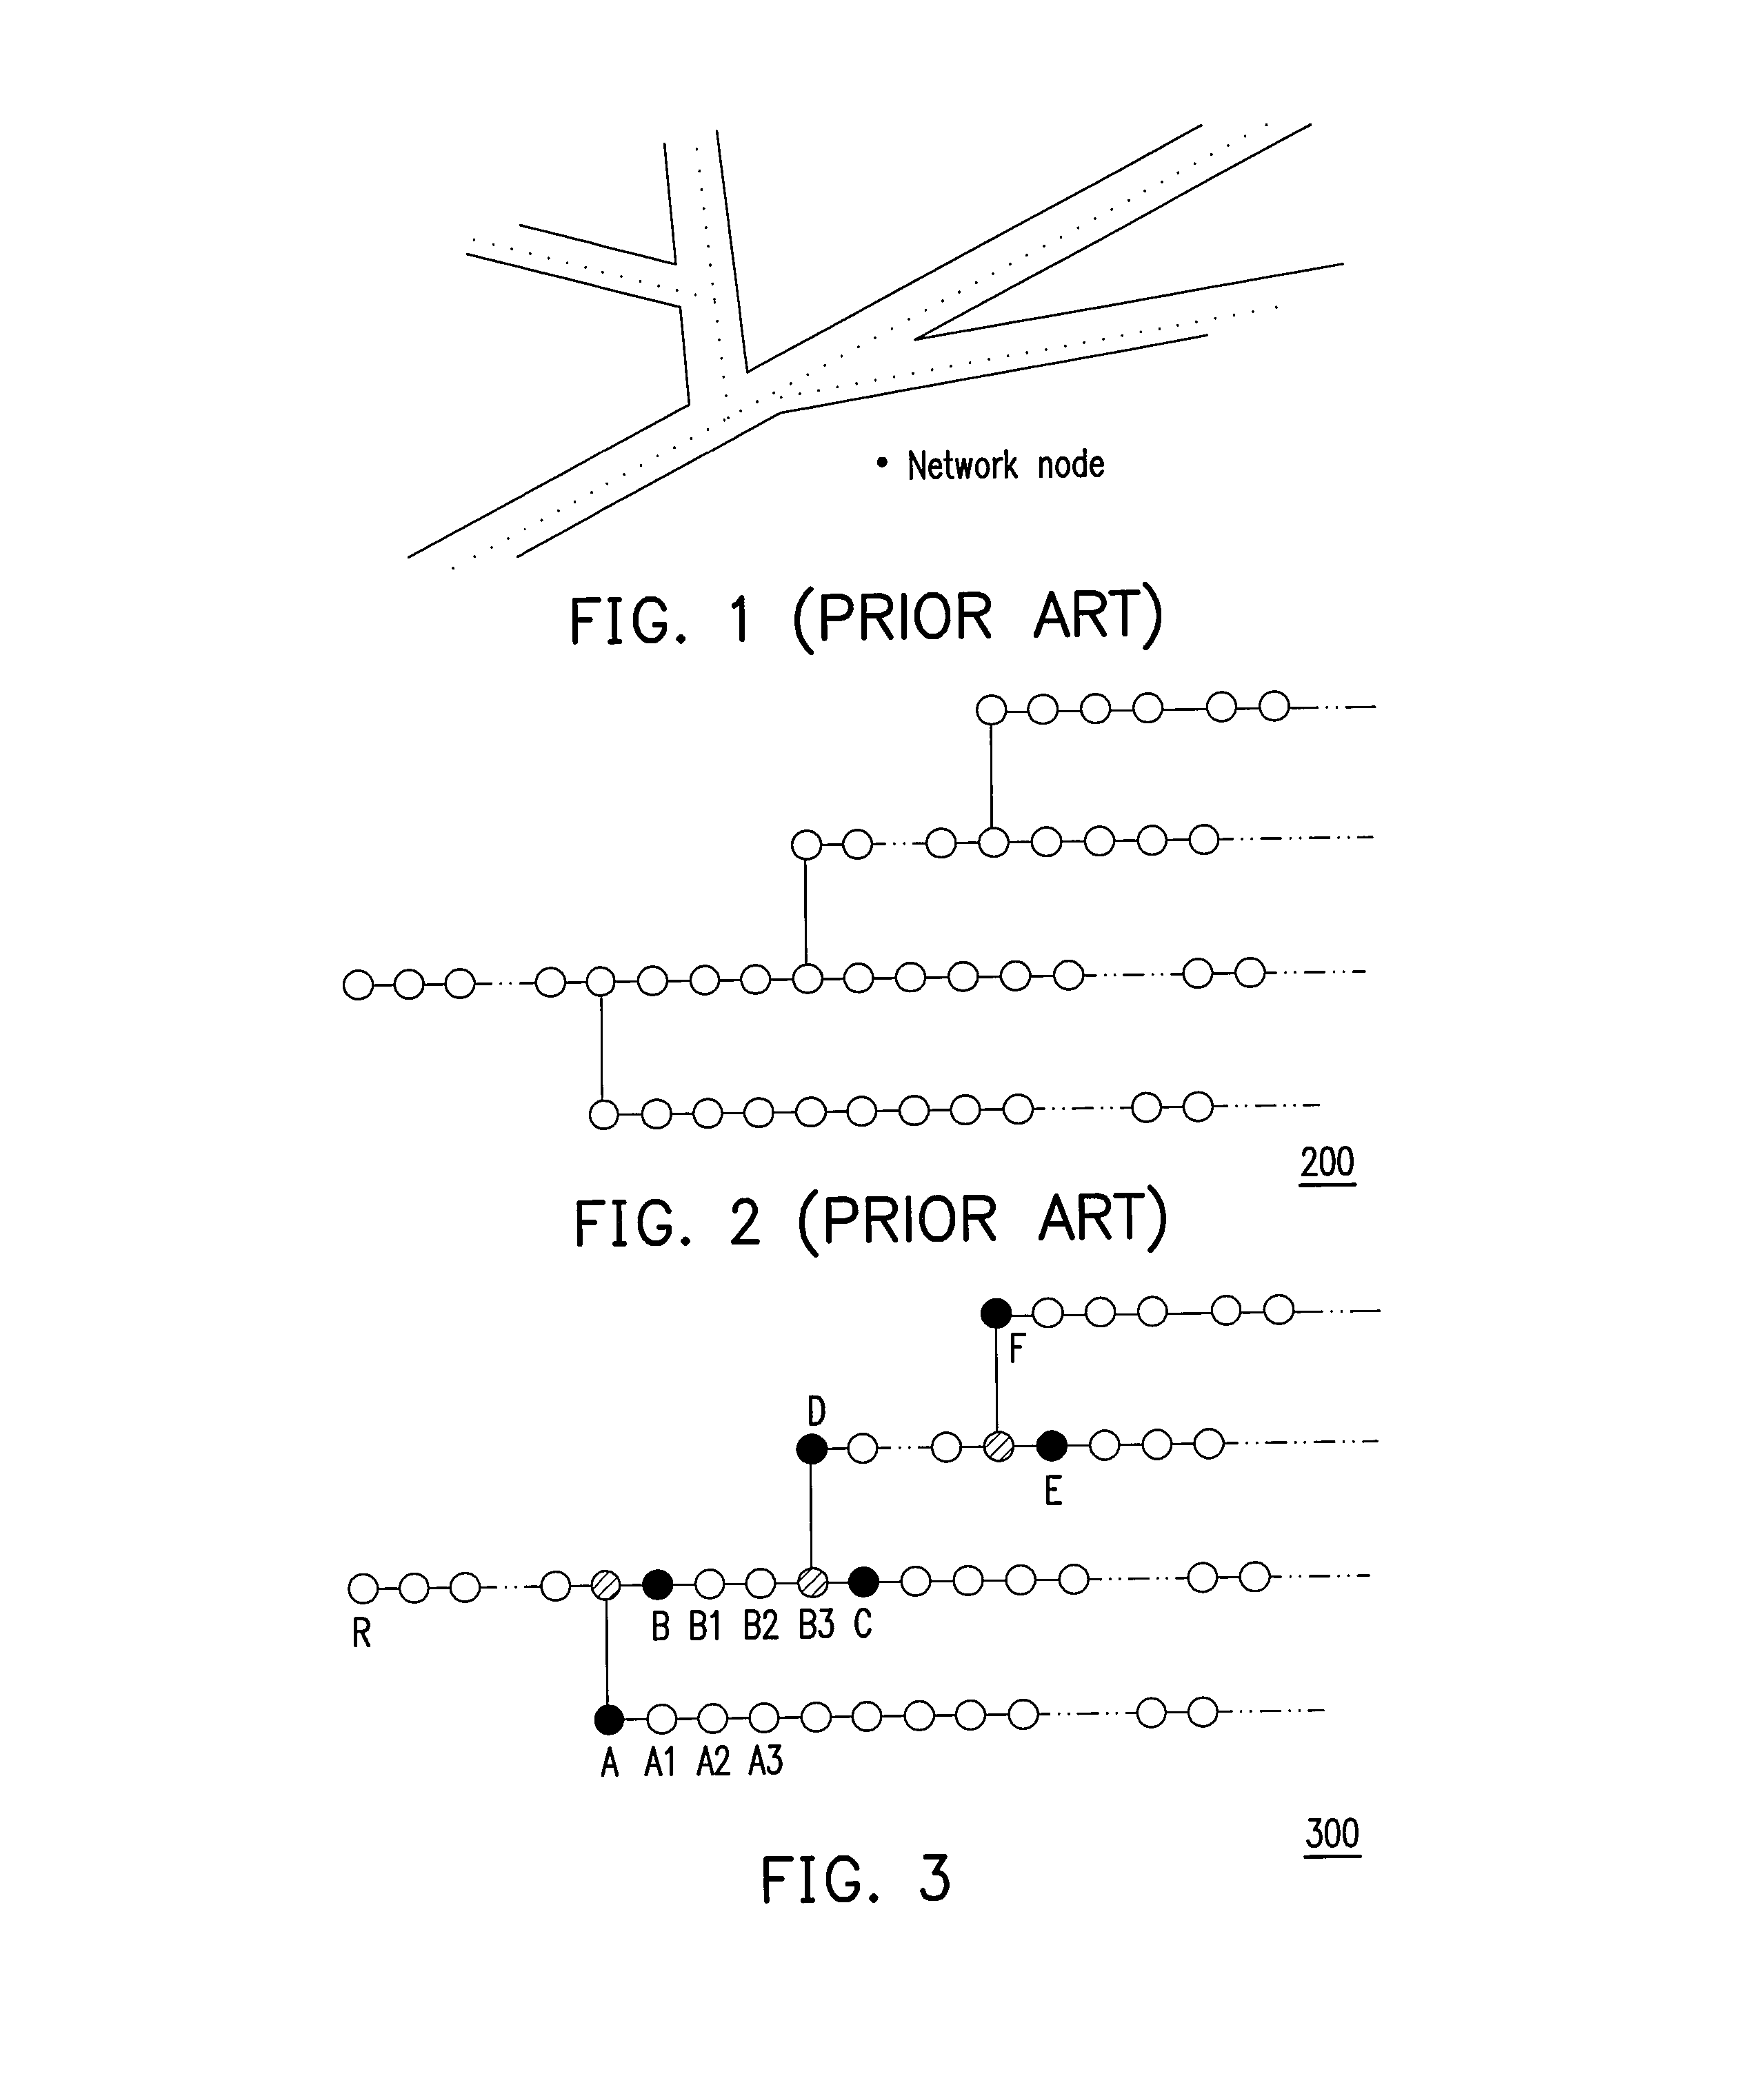 Network address assigning and allocating method and routing method for long-thin wireless network